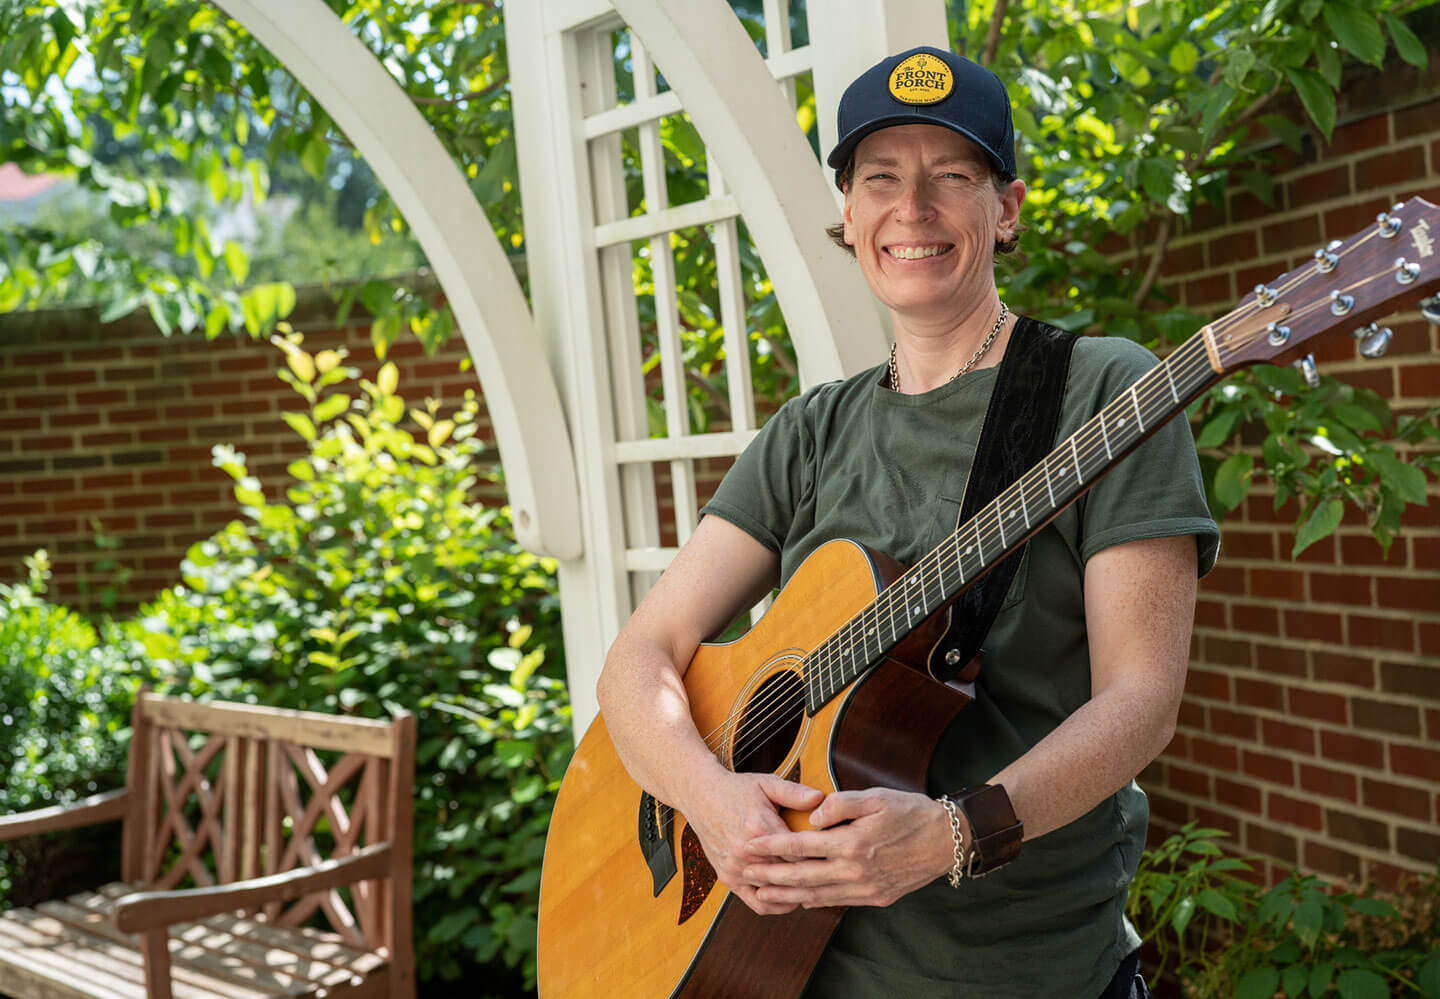 Clara, Front Porch Music volunteer wearing a green shirt and blue Front Porch hat holding a guitar and smiling on a front porch.